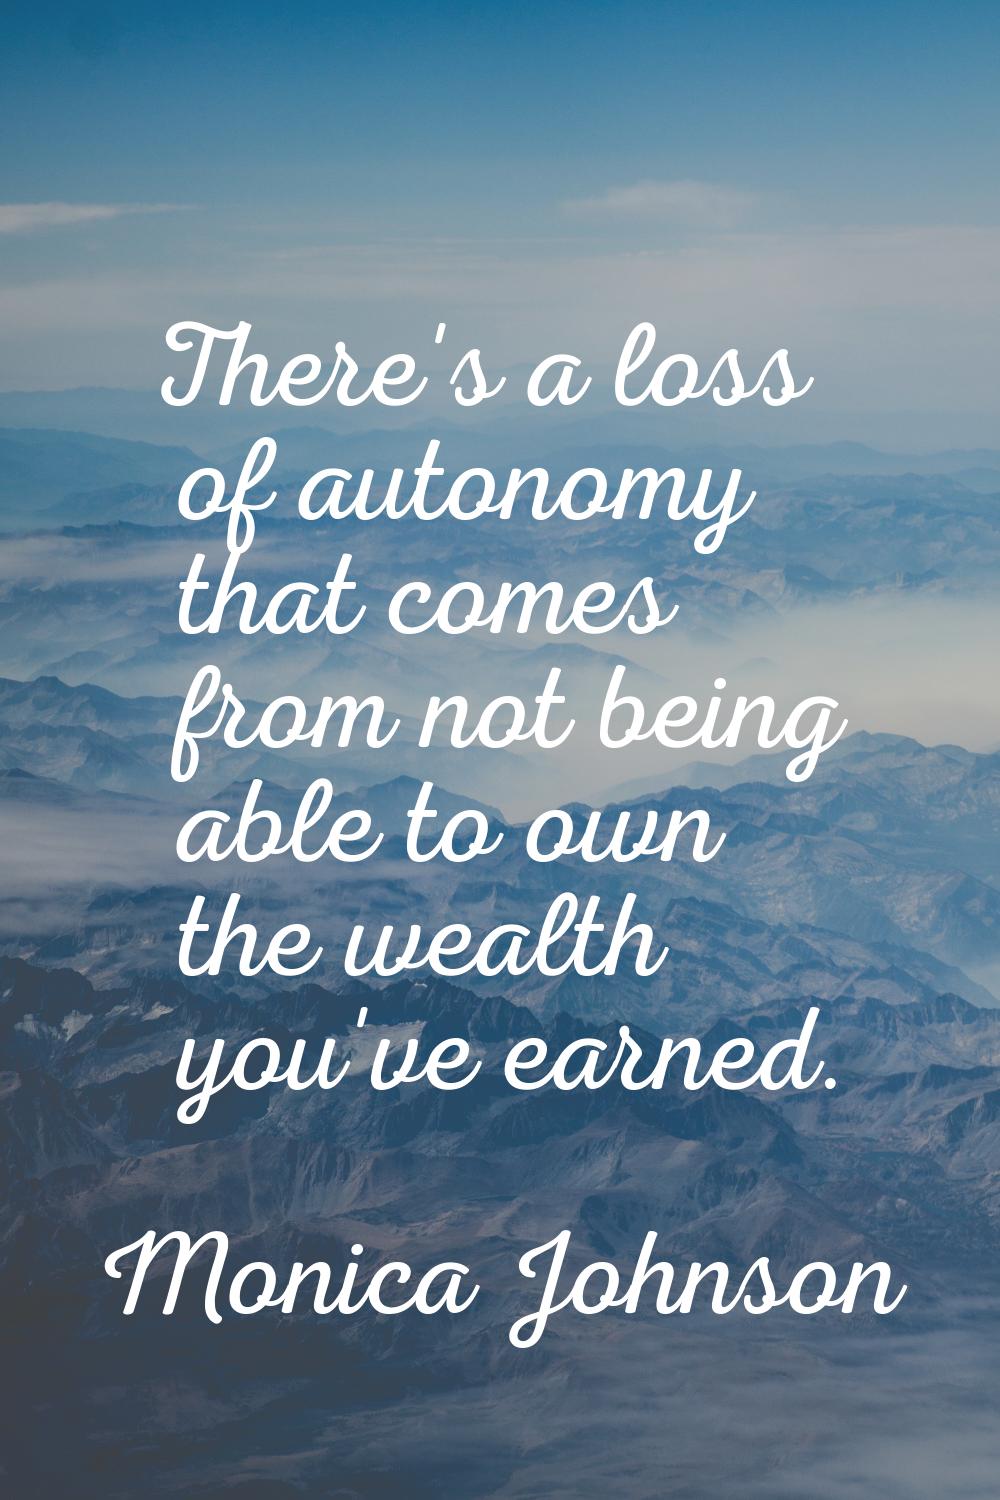 There's a loss of autonomy that comes from not being able to own the wealth you've earned.